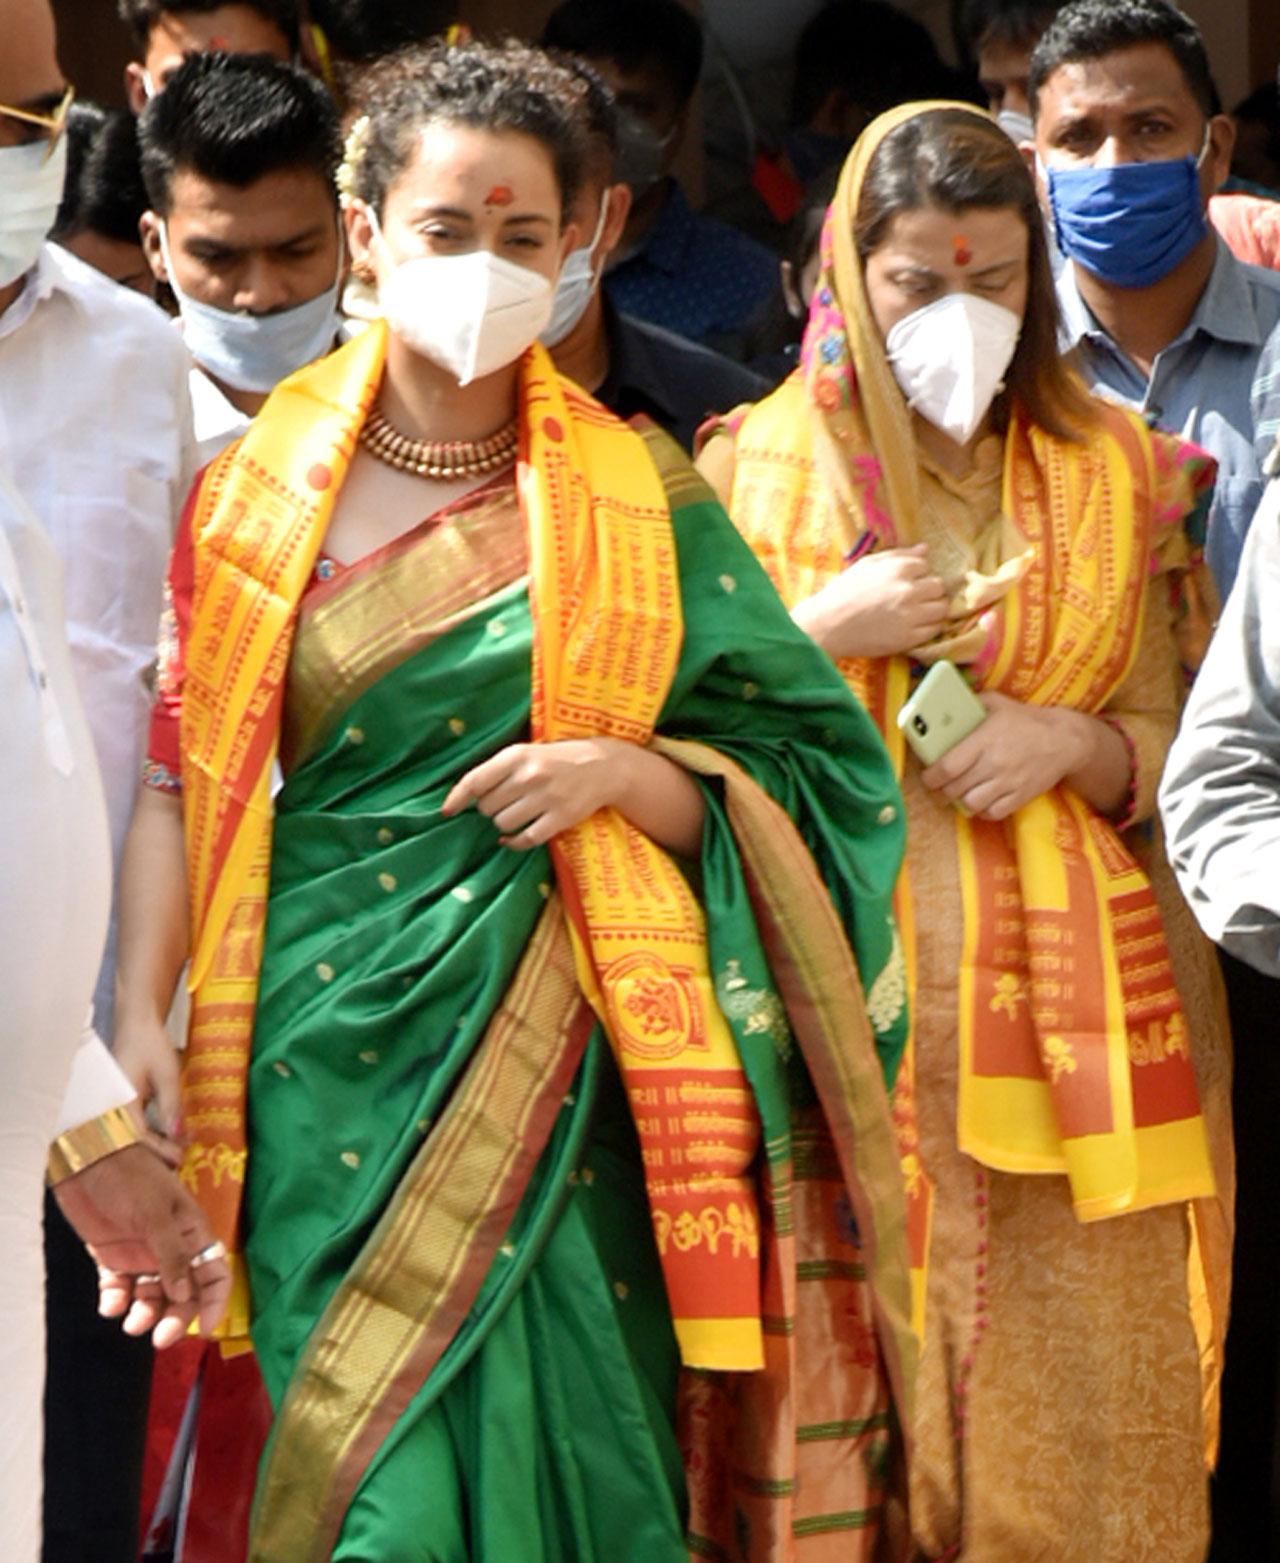 Kangana Ranaut shared pictures from her visit to the temples with her sister Rangoli Chandel and other family members on her social media account. The 33-year-old actor went on to express her love for Maharashtra in the caption of the post.
In picture: Kangana Ranaut with sister Rangoli Chandel at Siddhivinayak Temple in Prabhadevi.